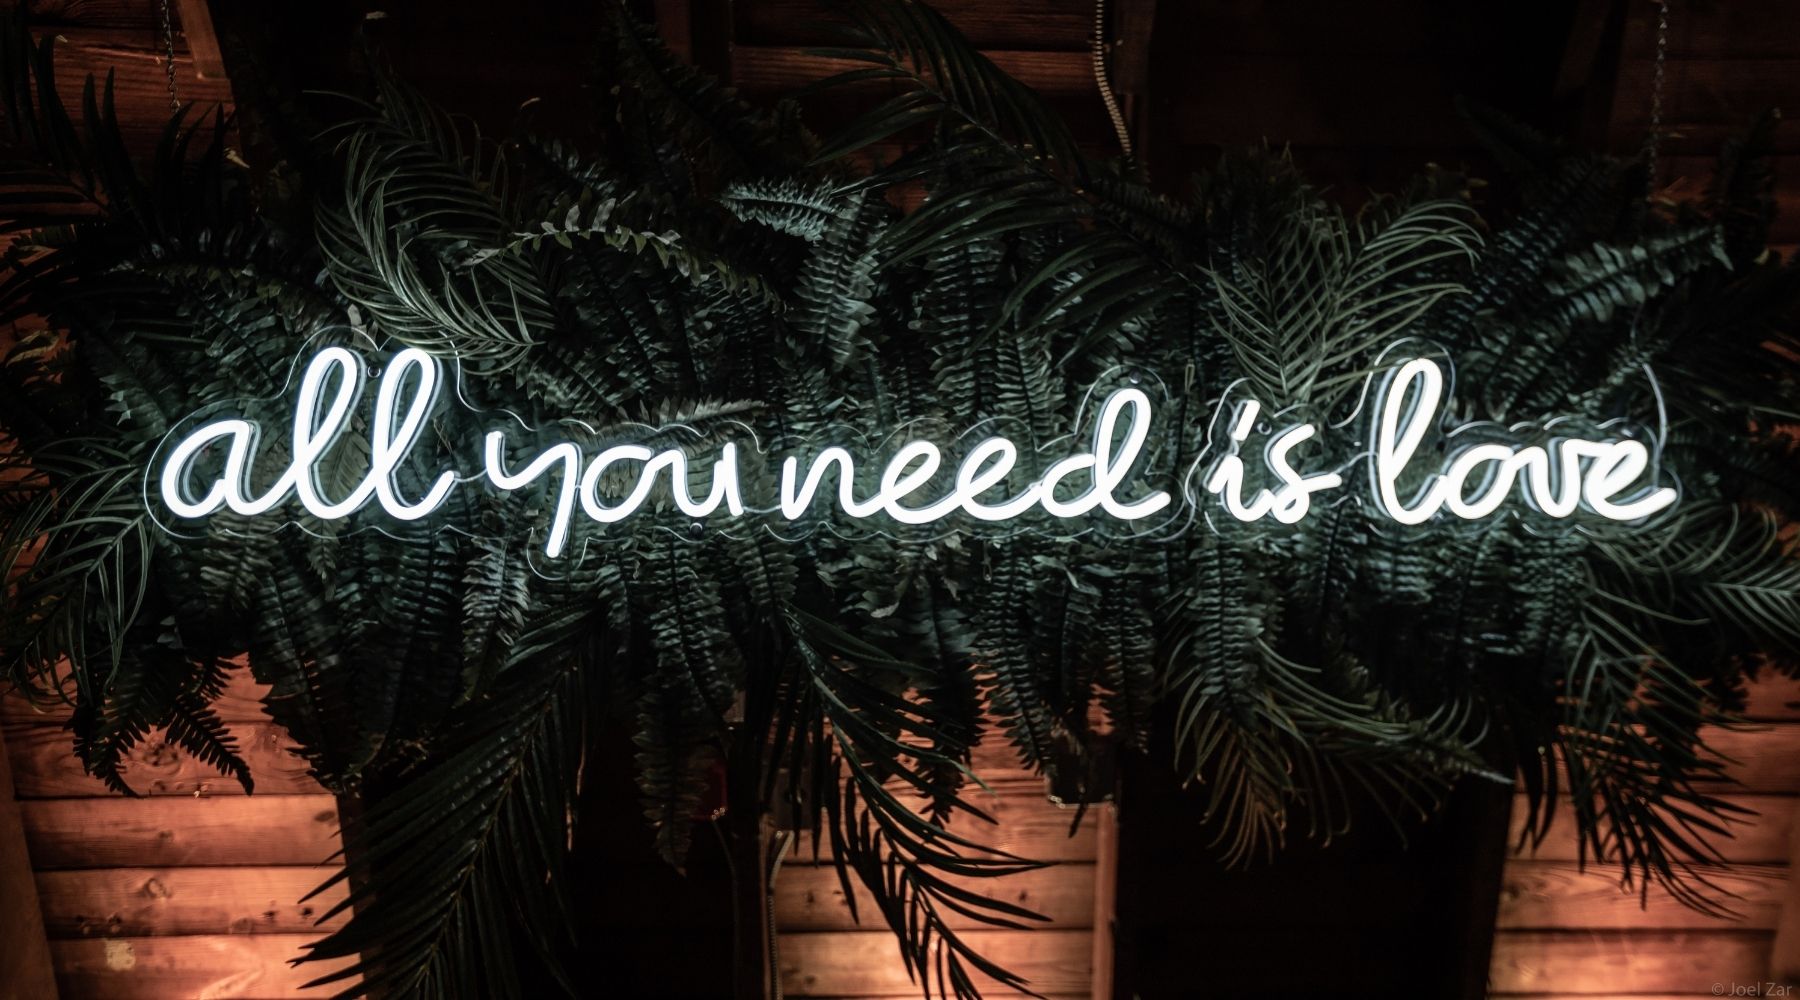 All You Need is love neon sign